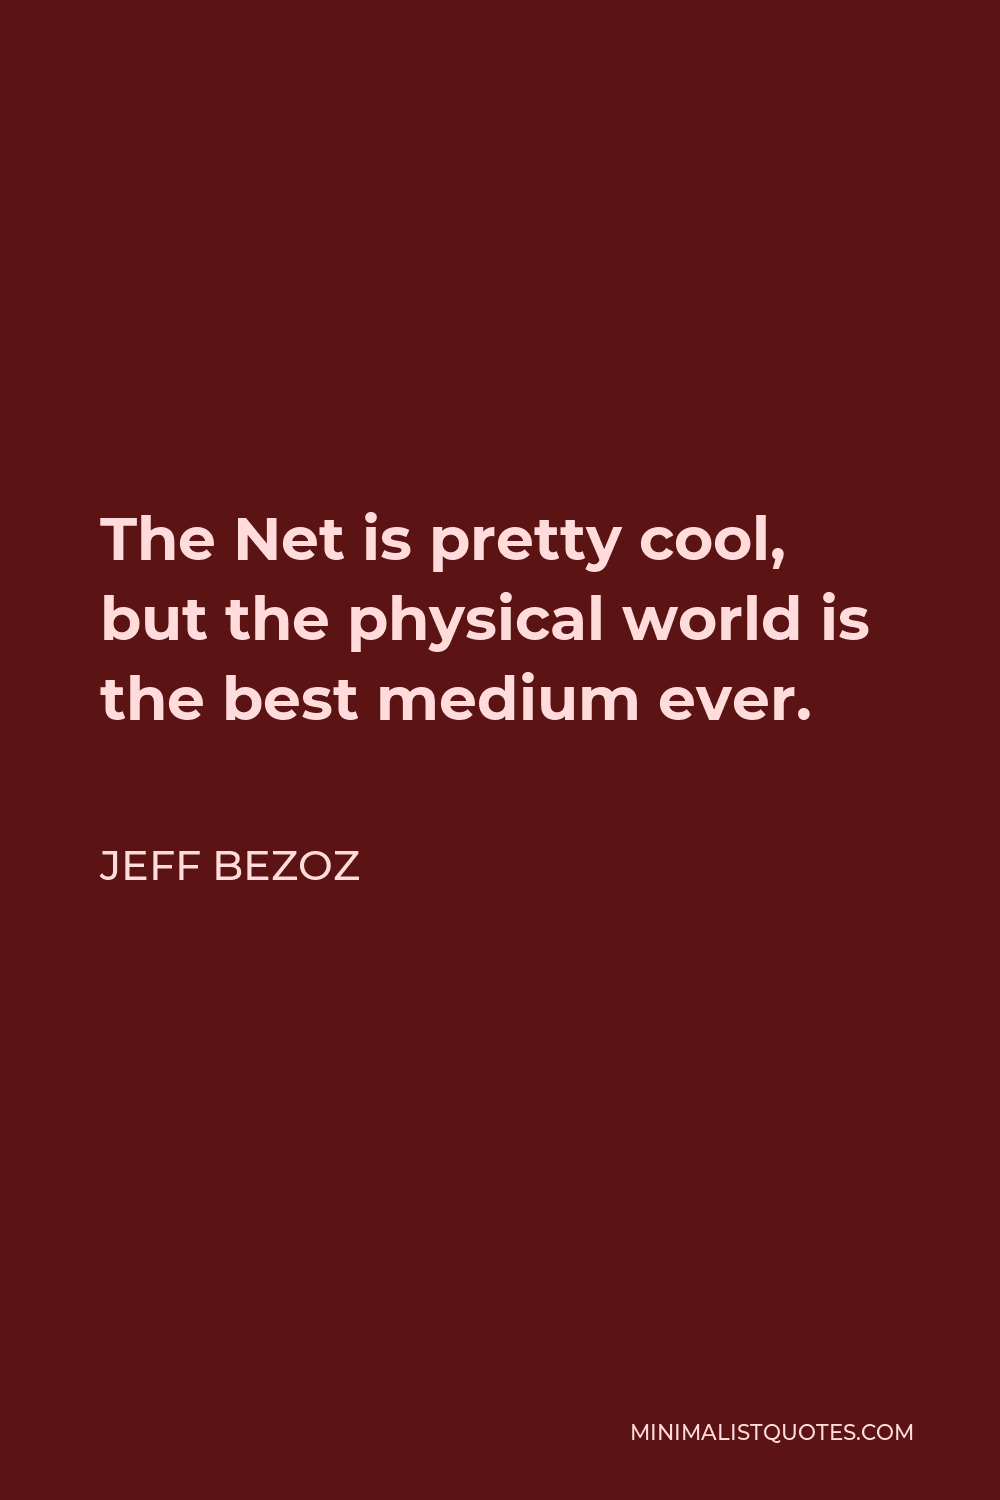 Jeff Bezoz Quote - The Net is pretty cool, but the physical world is the best medium ever.